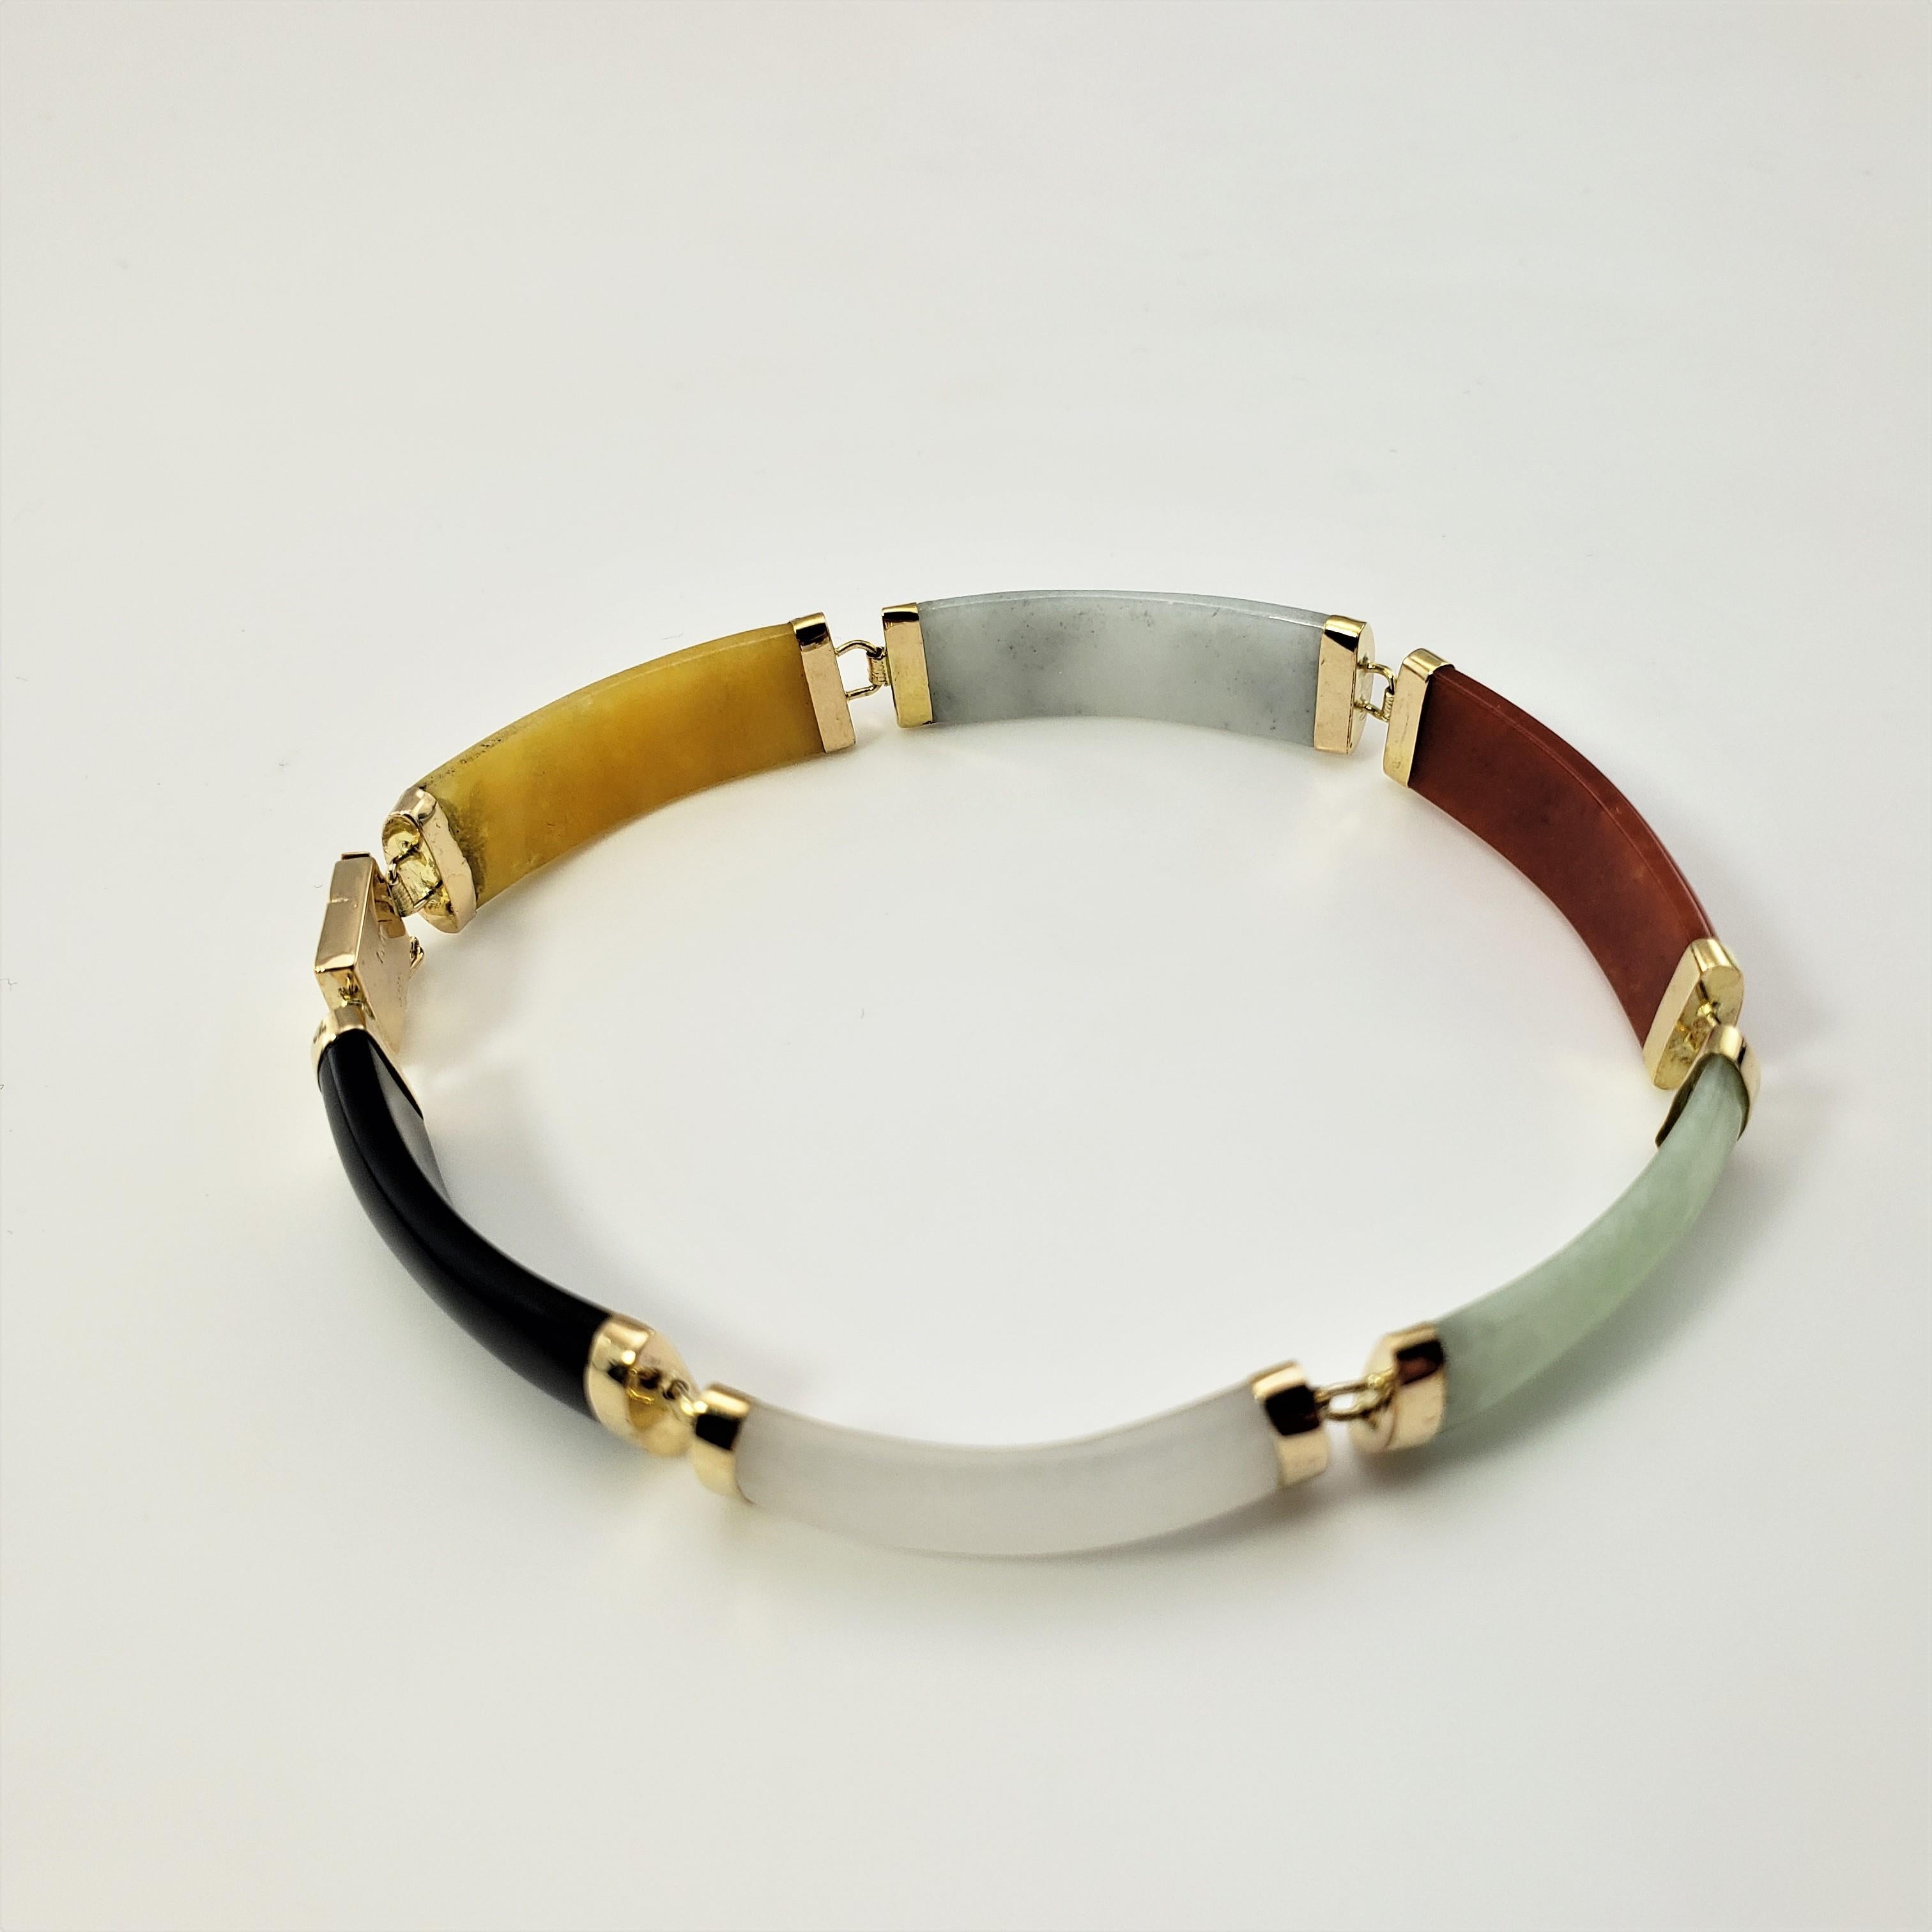 14 Karat Yellow Gold Multi-Colored Jade Bracelet-

This lovely bracelet features six multi-colored jade links set in classic 14K yellow gold.  Width:  8 mm.  

Size:  7 inches 

Weight:  7.2 dwt./  11.3 gr.

Stamped: 14K  585

Very good condition,